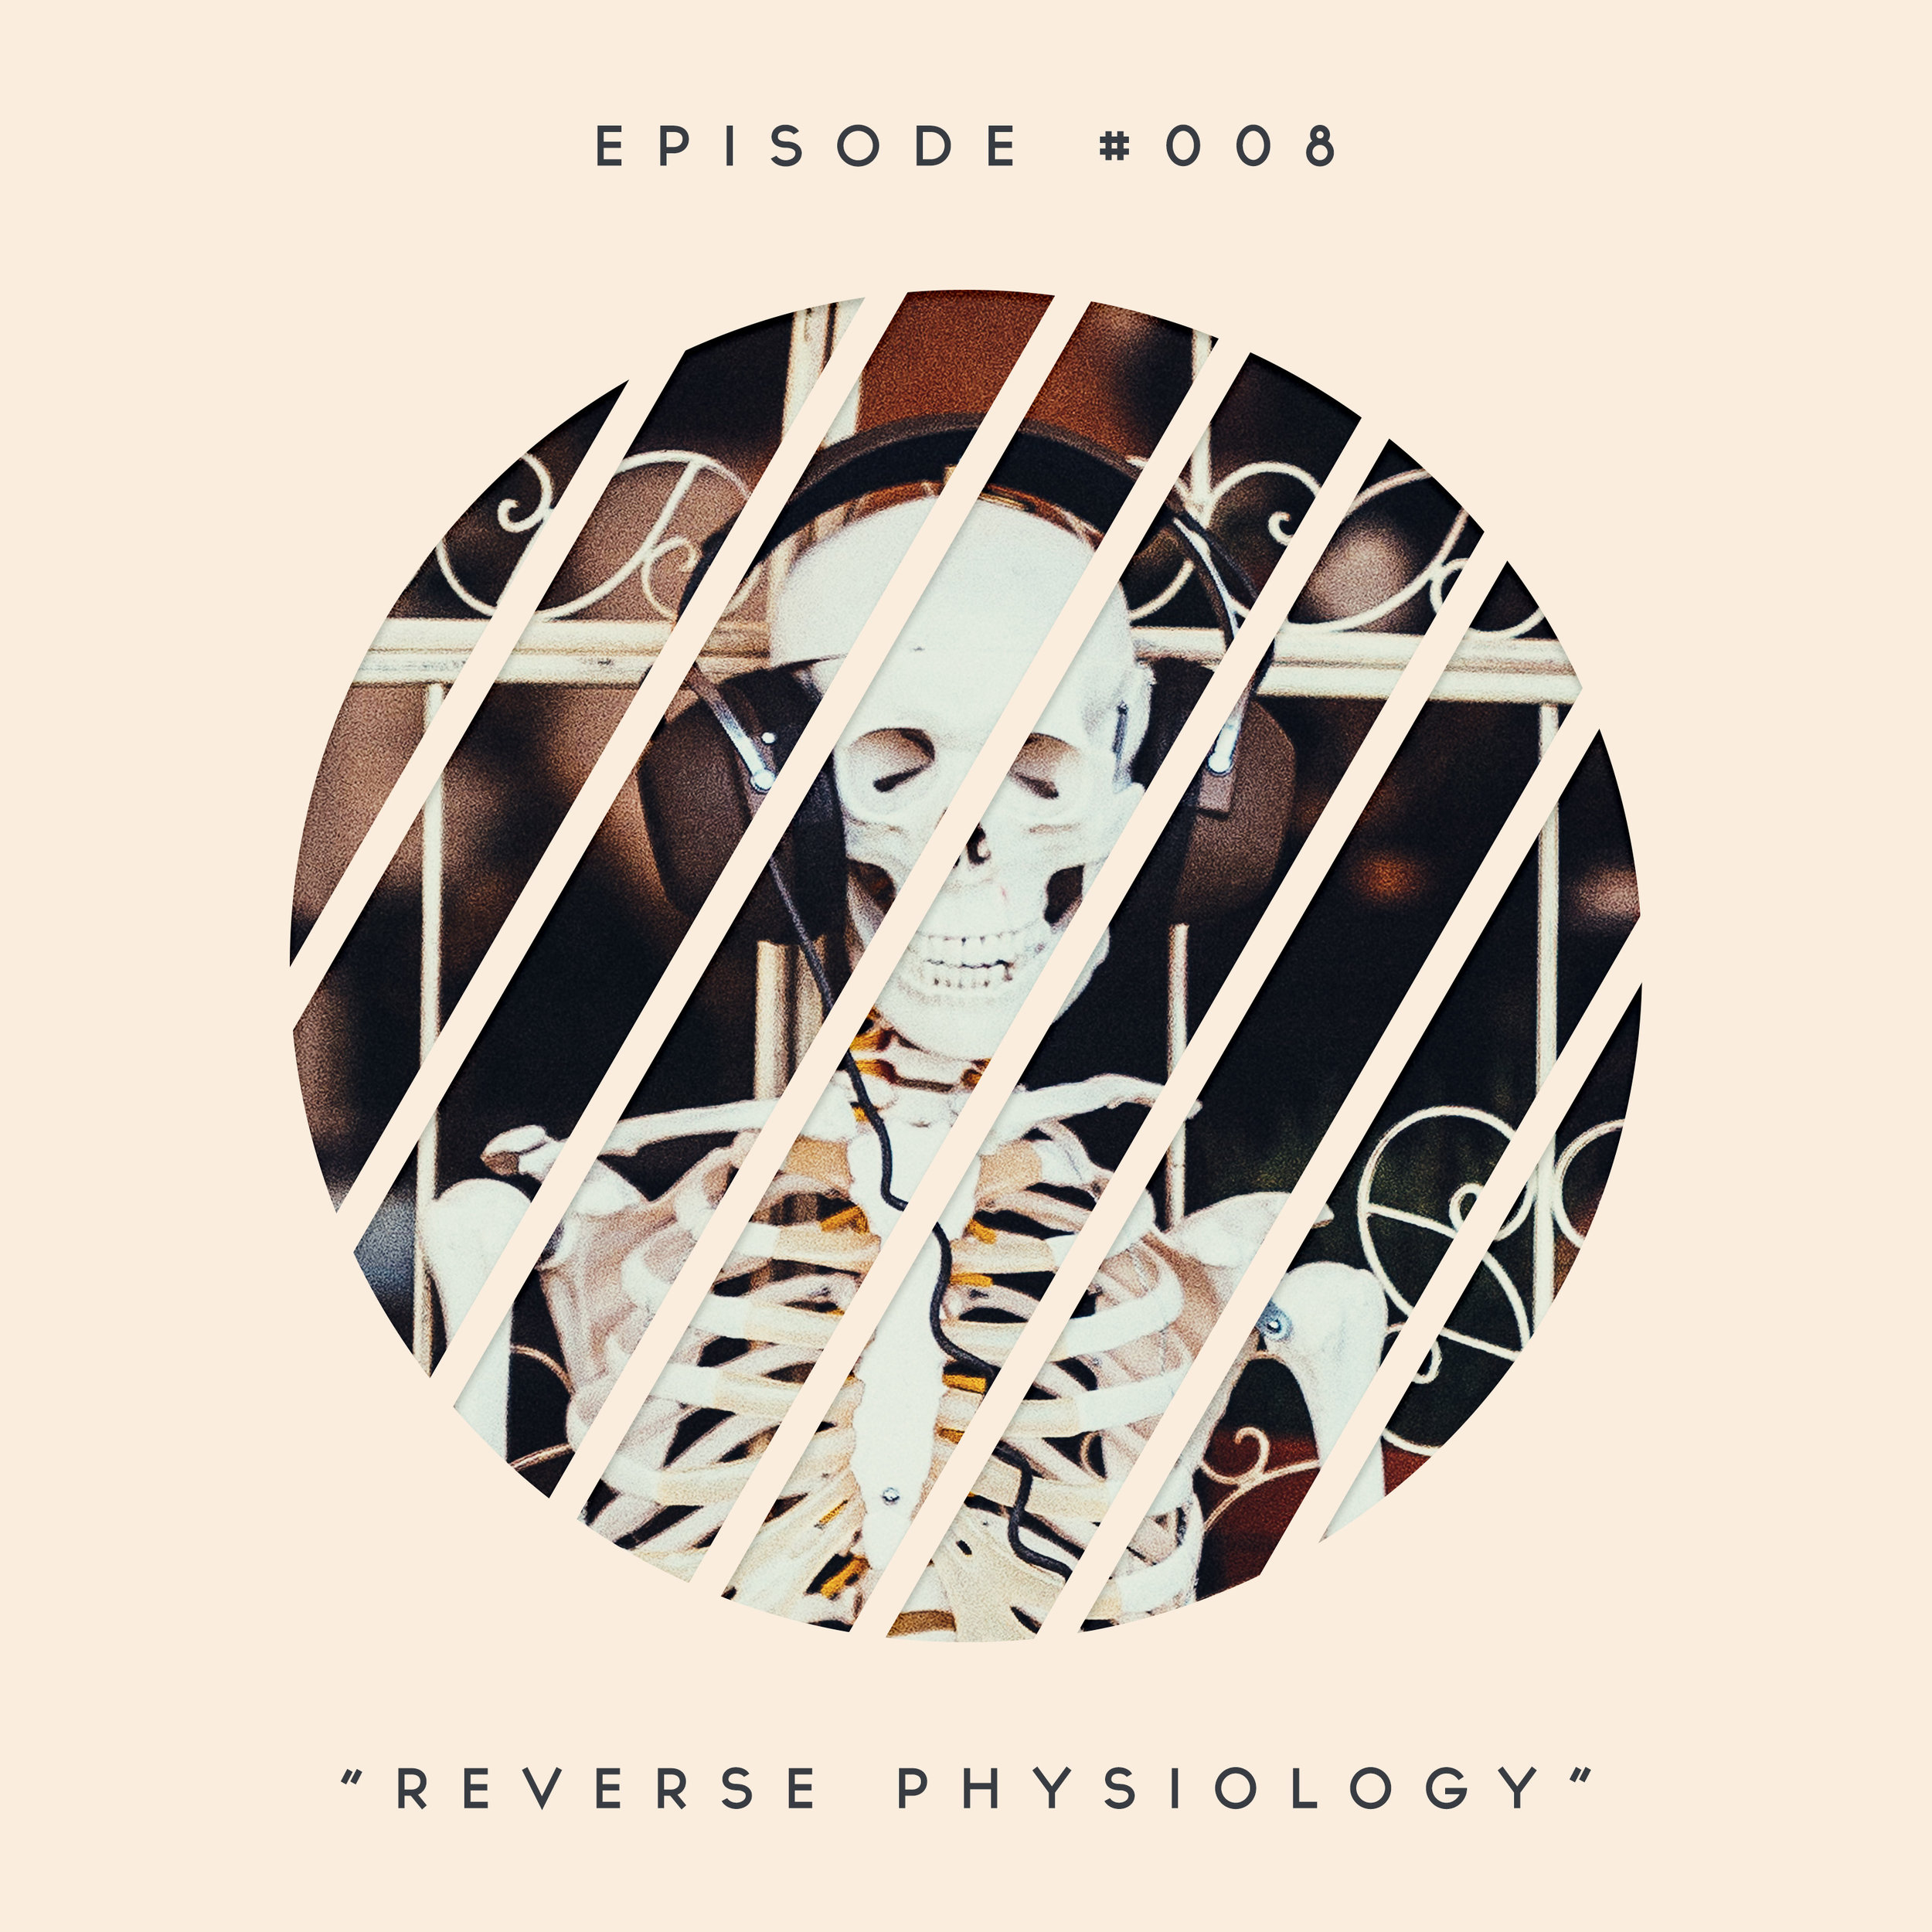 8: Reverse Physiology